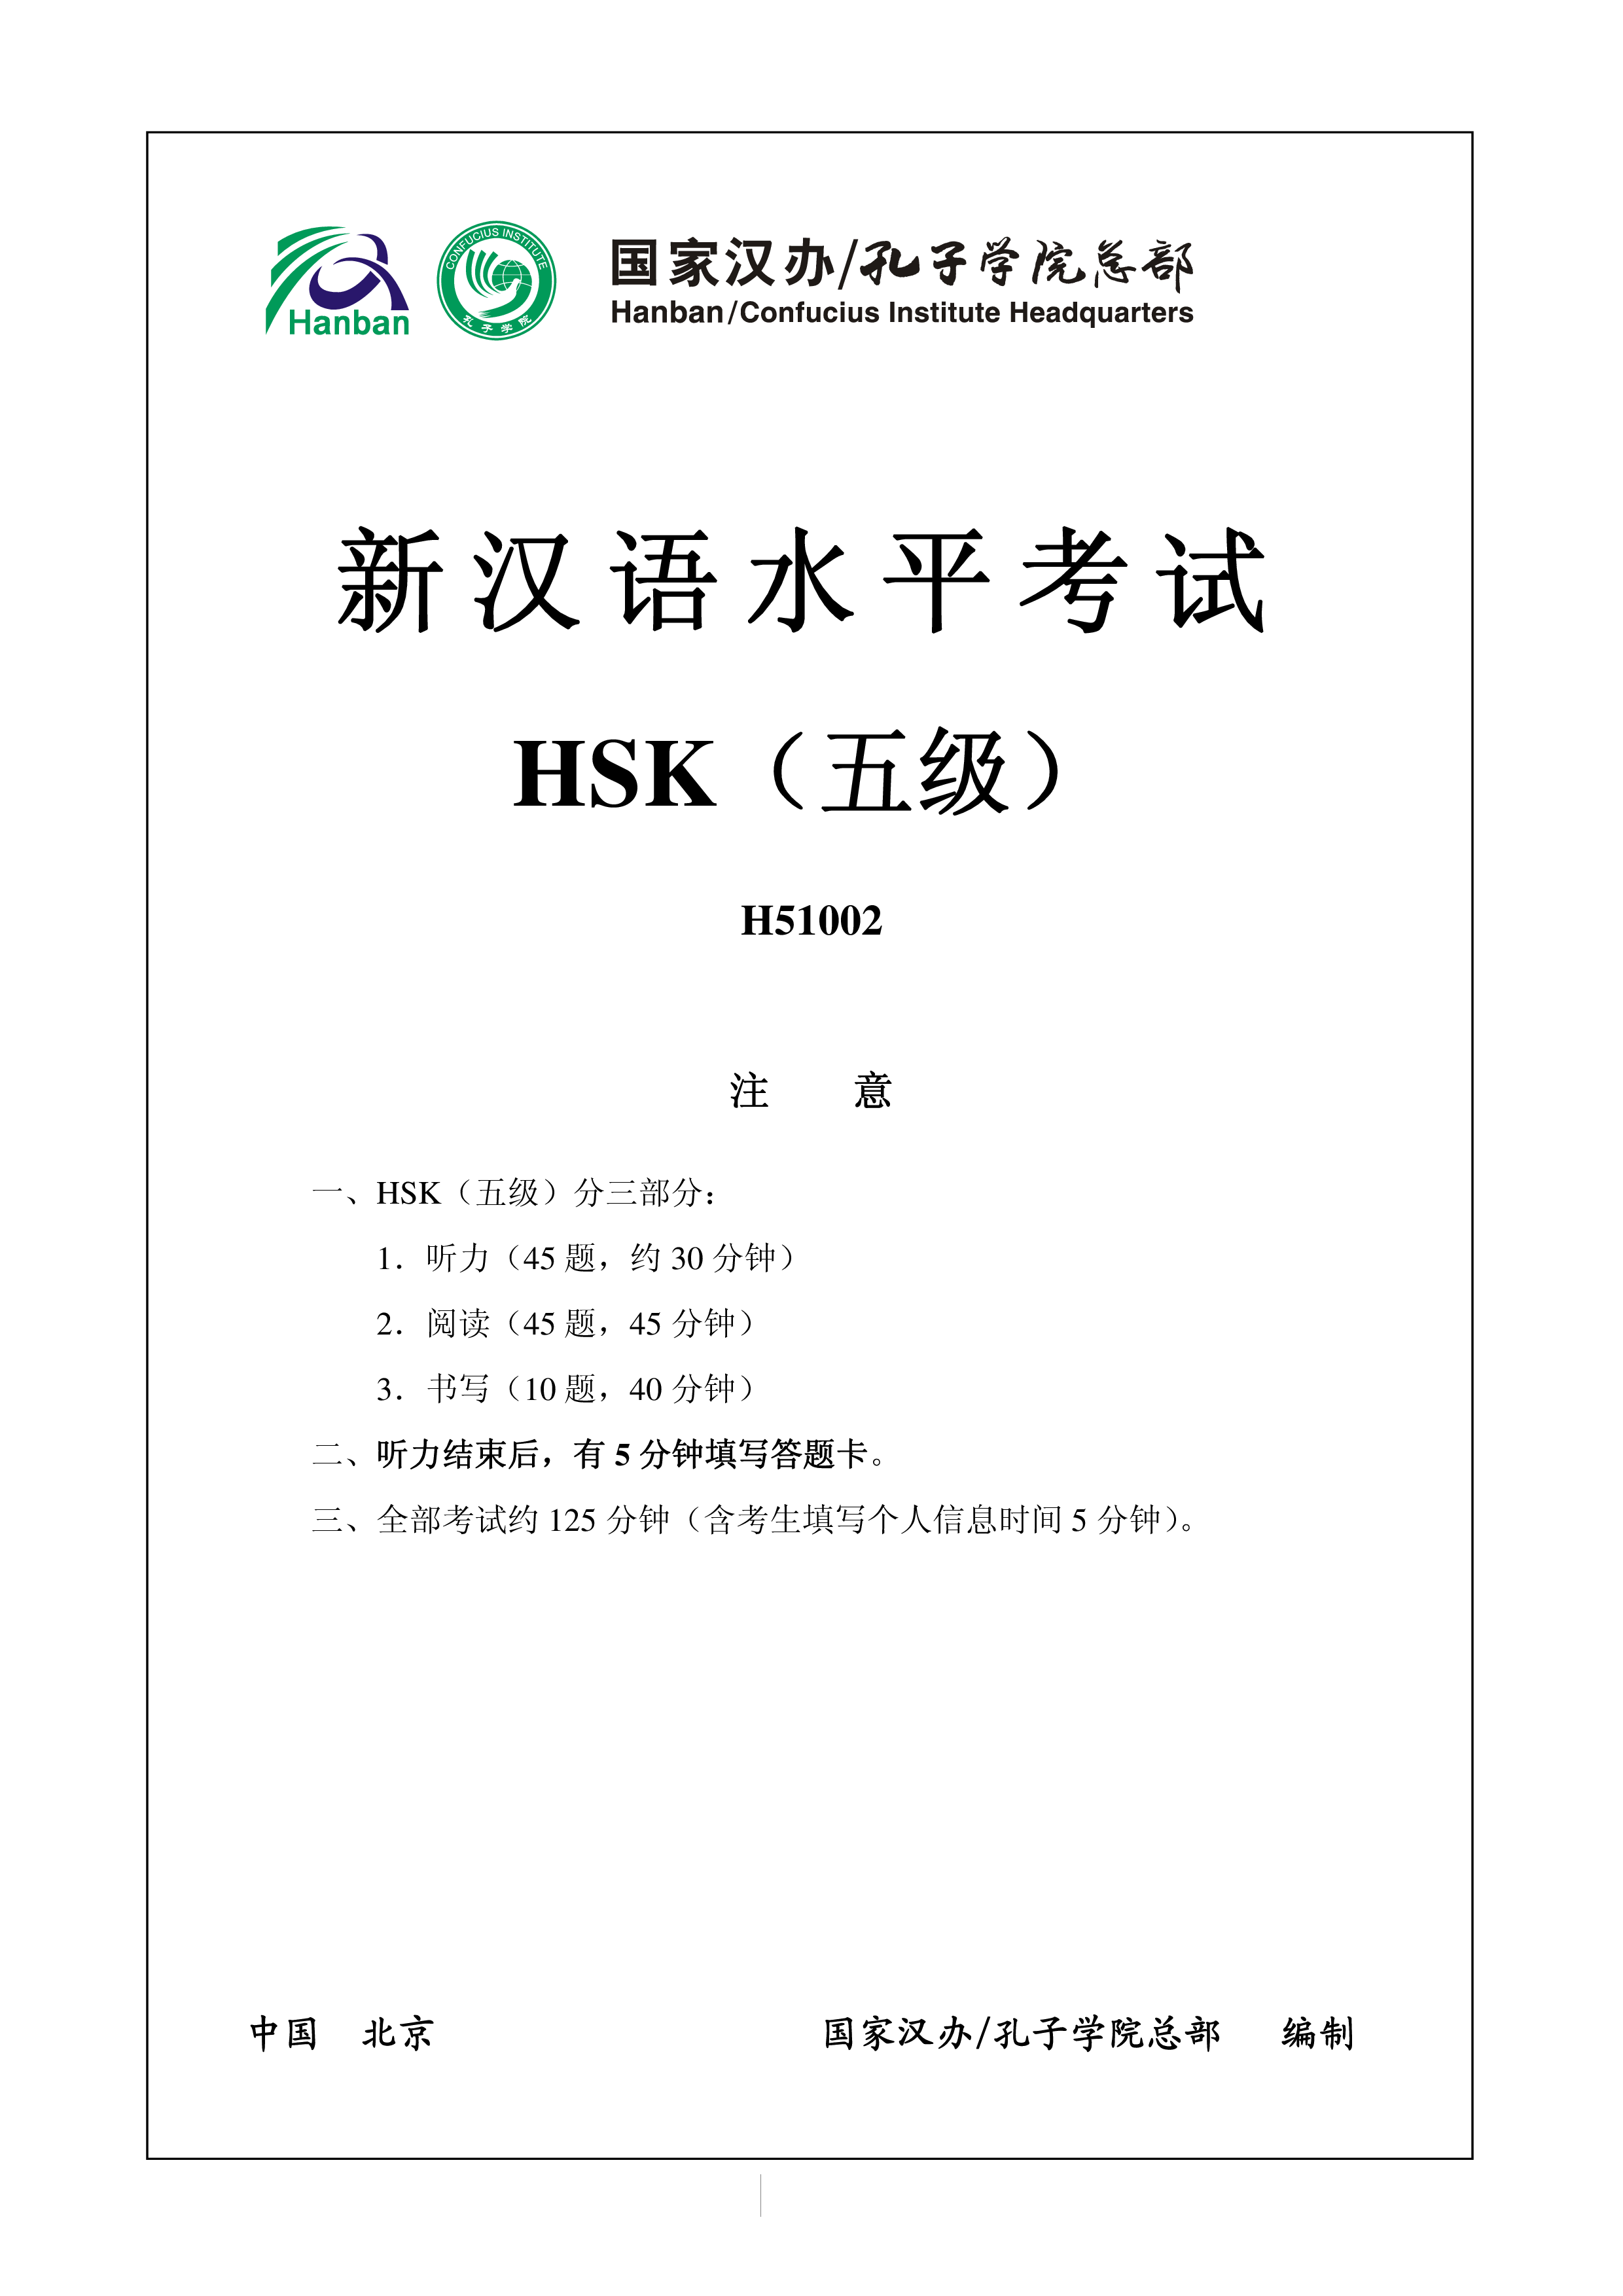 hsk5 h51002 chinese exam, including audio and answers plantilla imagen principal